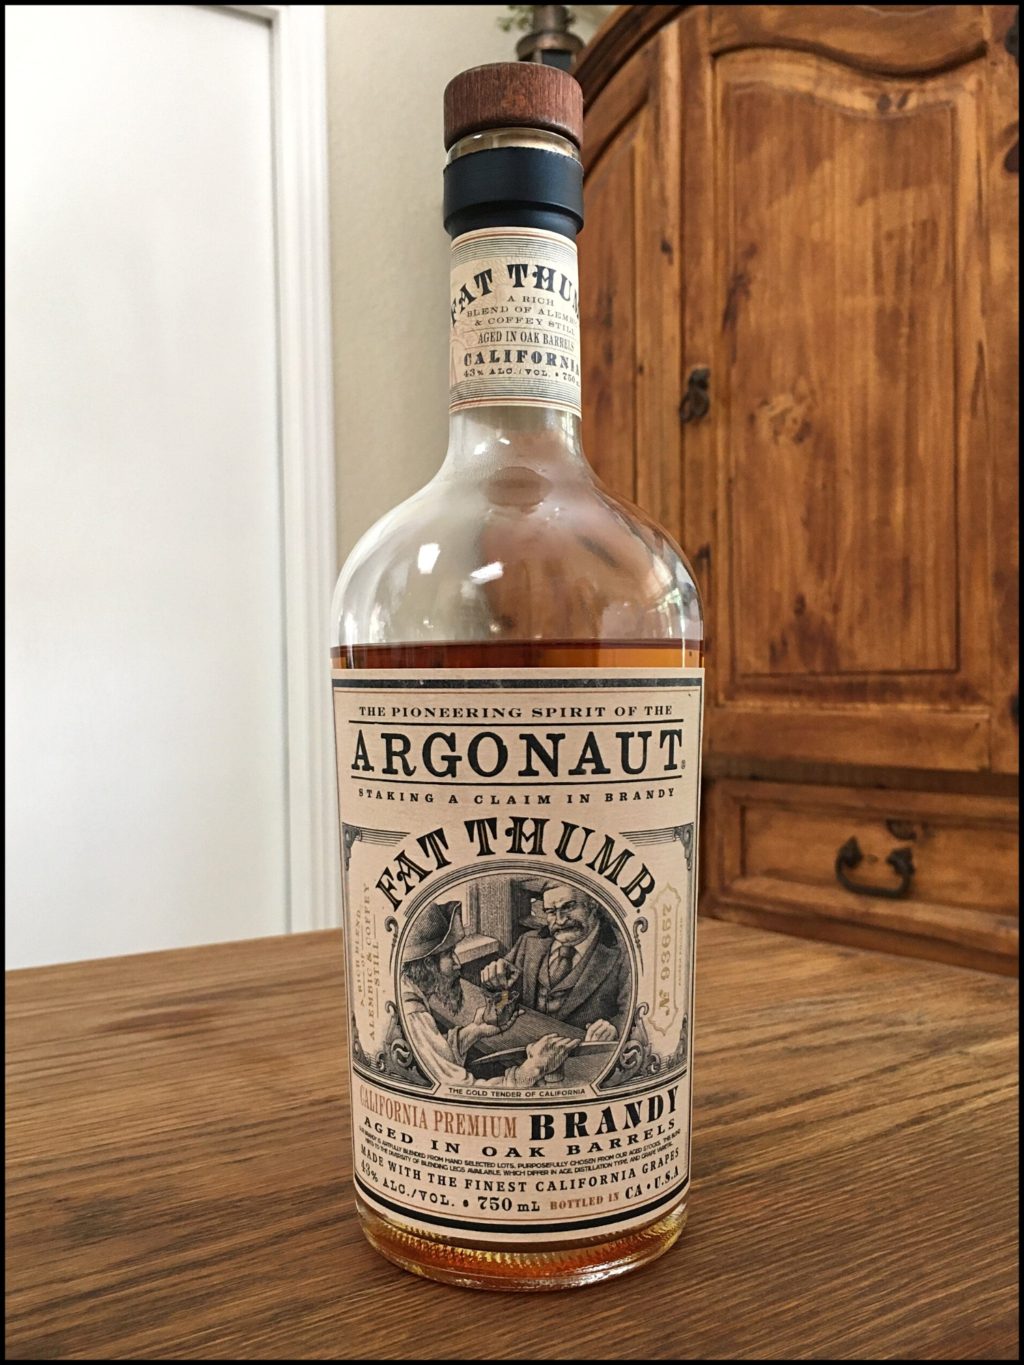 Bottle of Argonaut Fat Thumb Brandy sitting on a wooden table, in front of a mixed white and wooden background